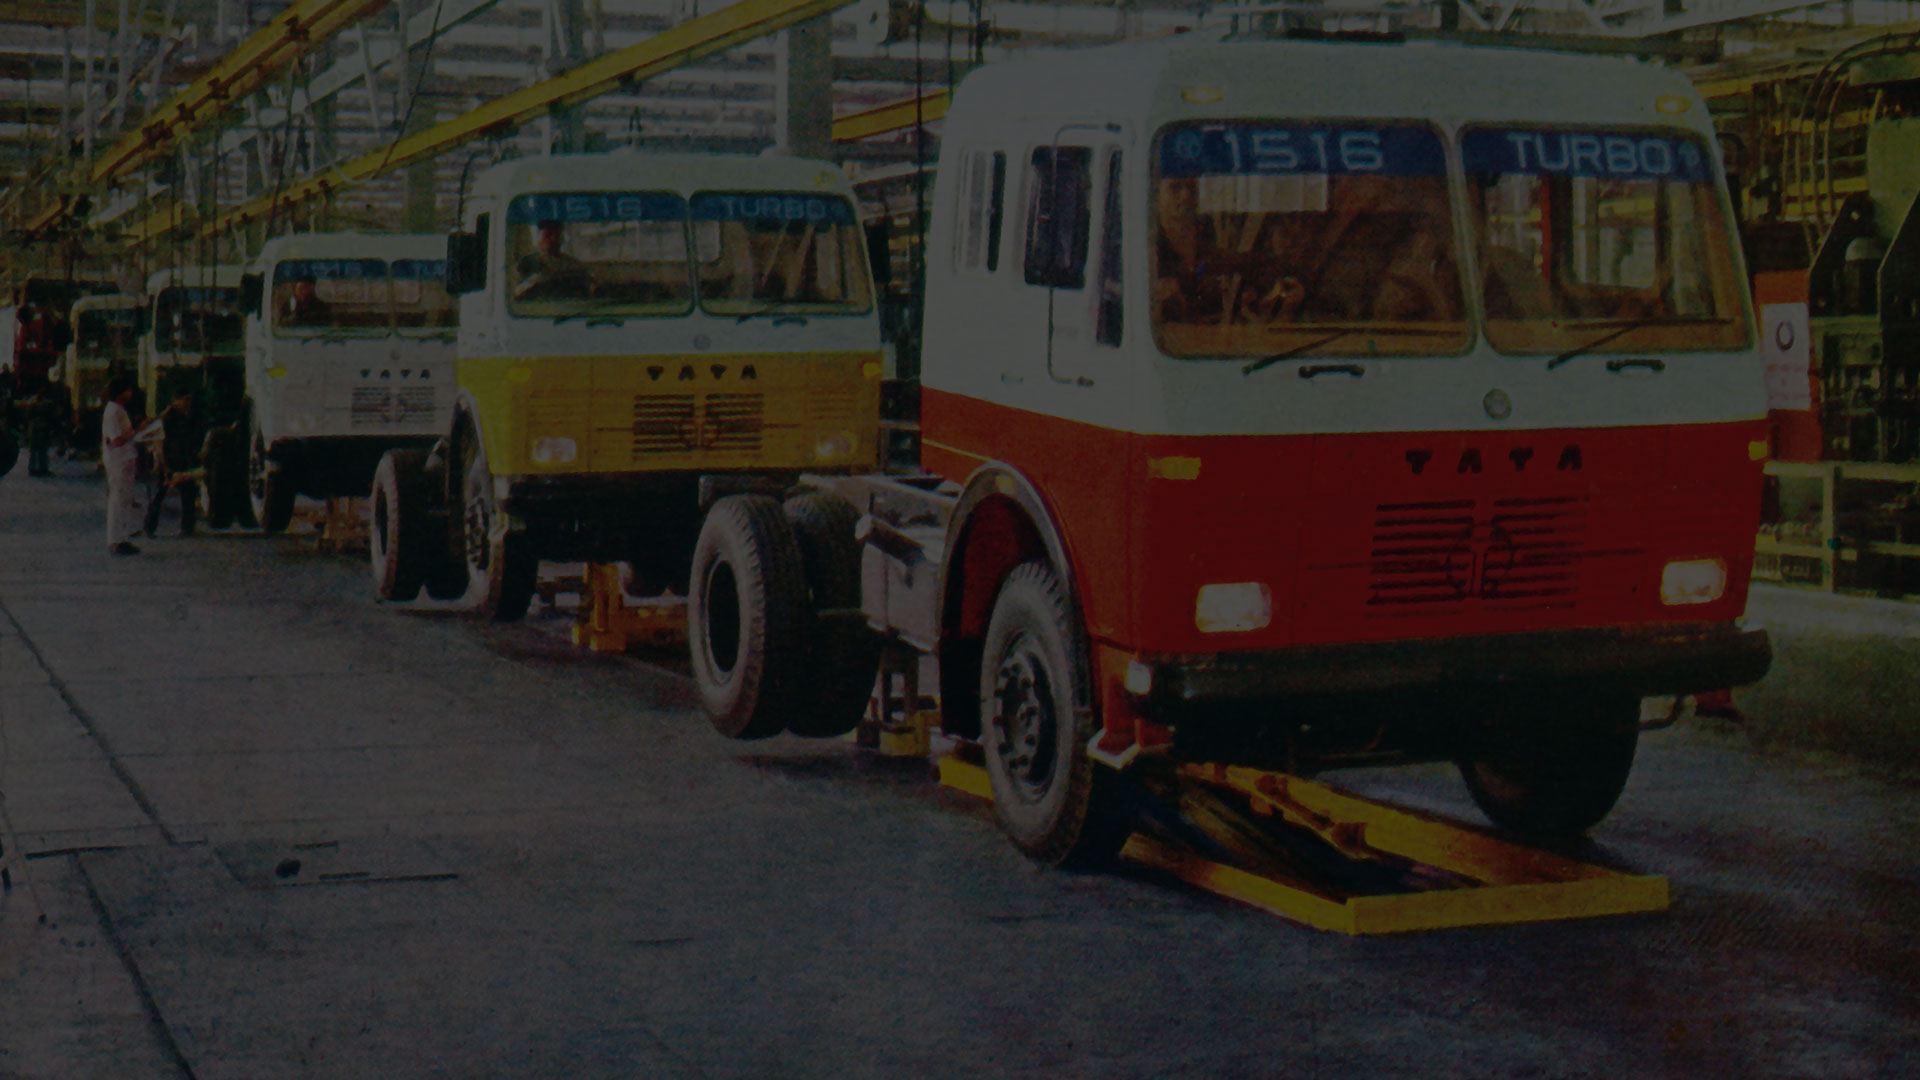 1516 vehicles at the TELCO assembly line in Pune